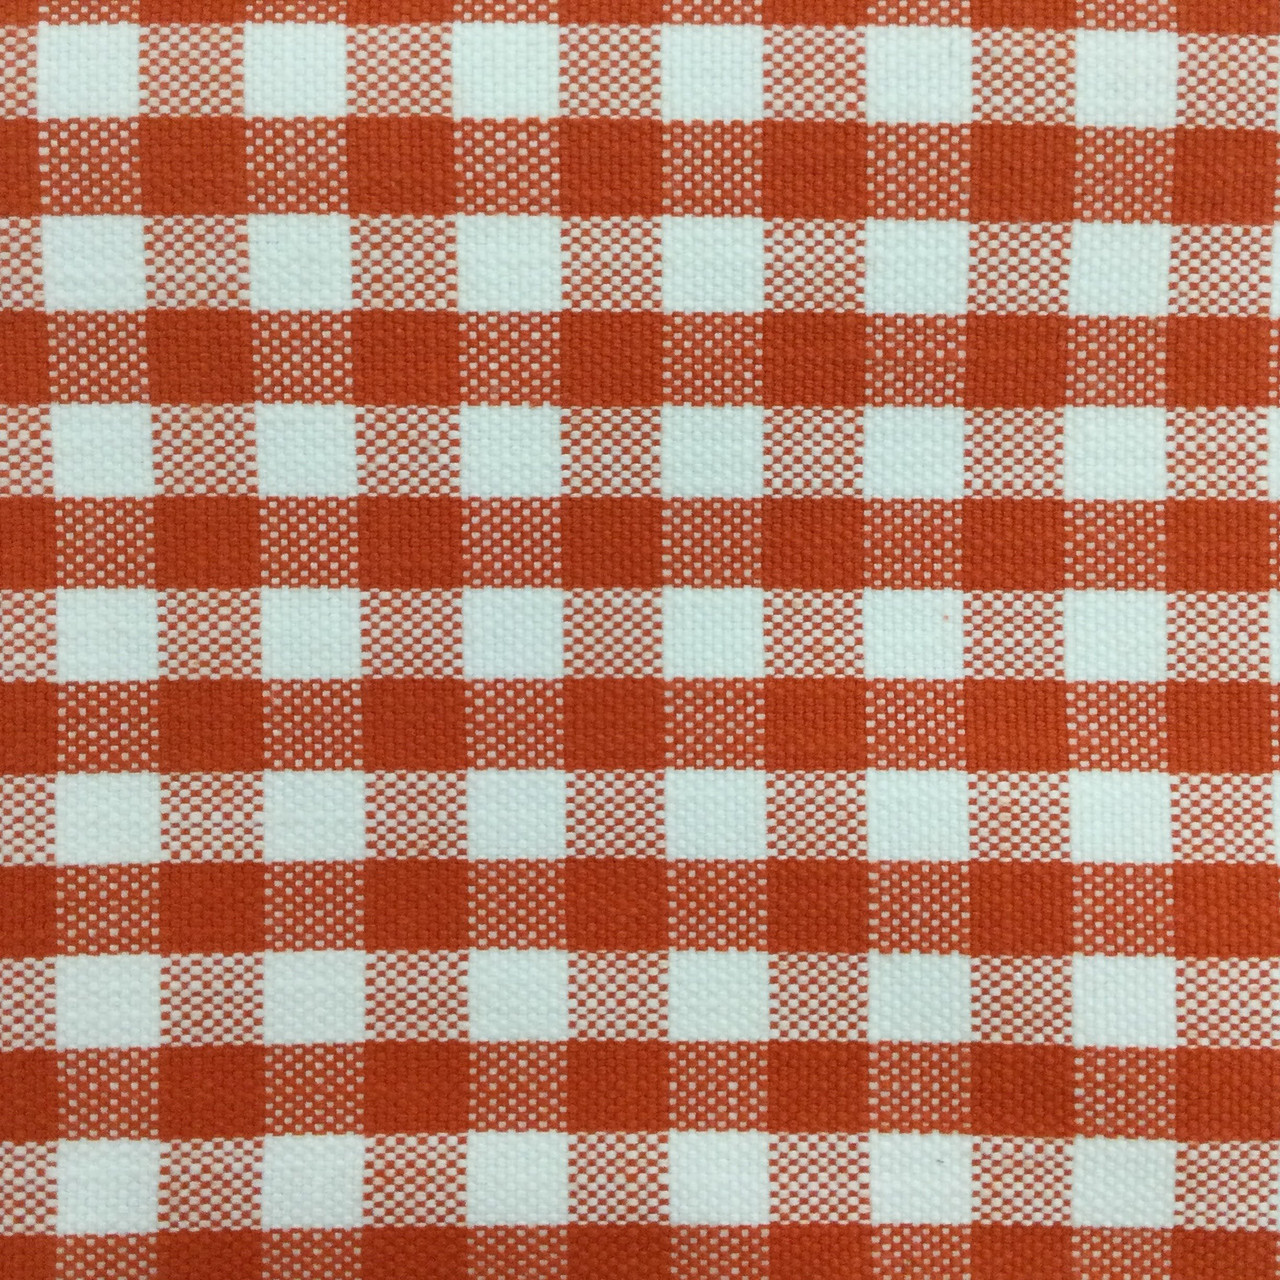 Watermelon Pink Plaid Woven Patterns Upholstery Fabric by The Yard